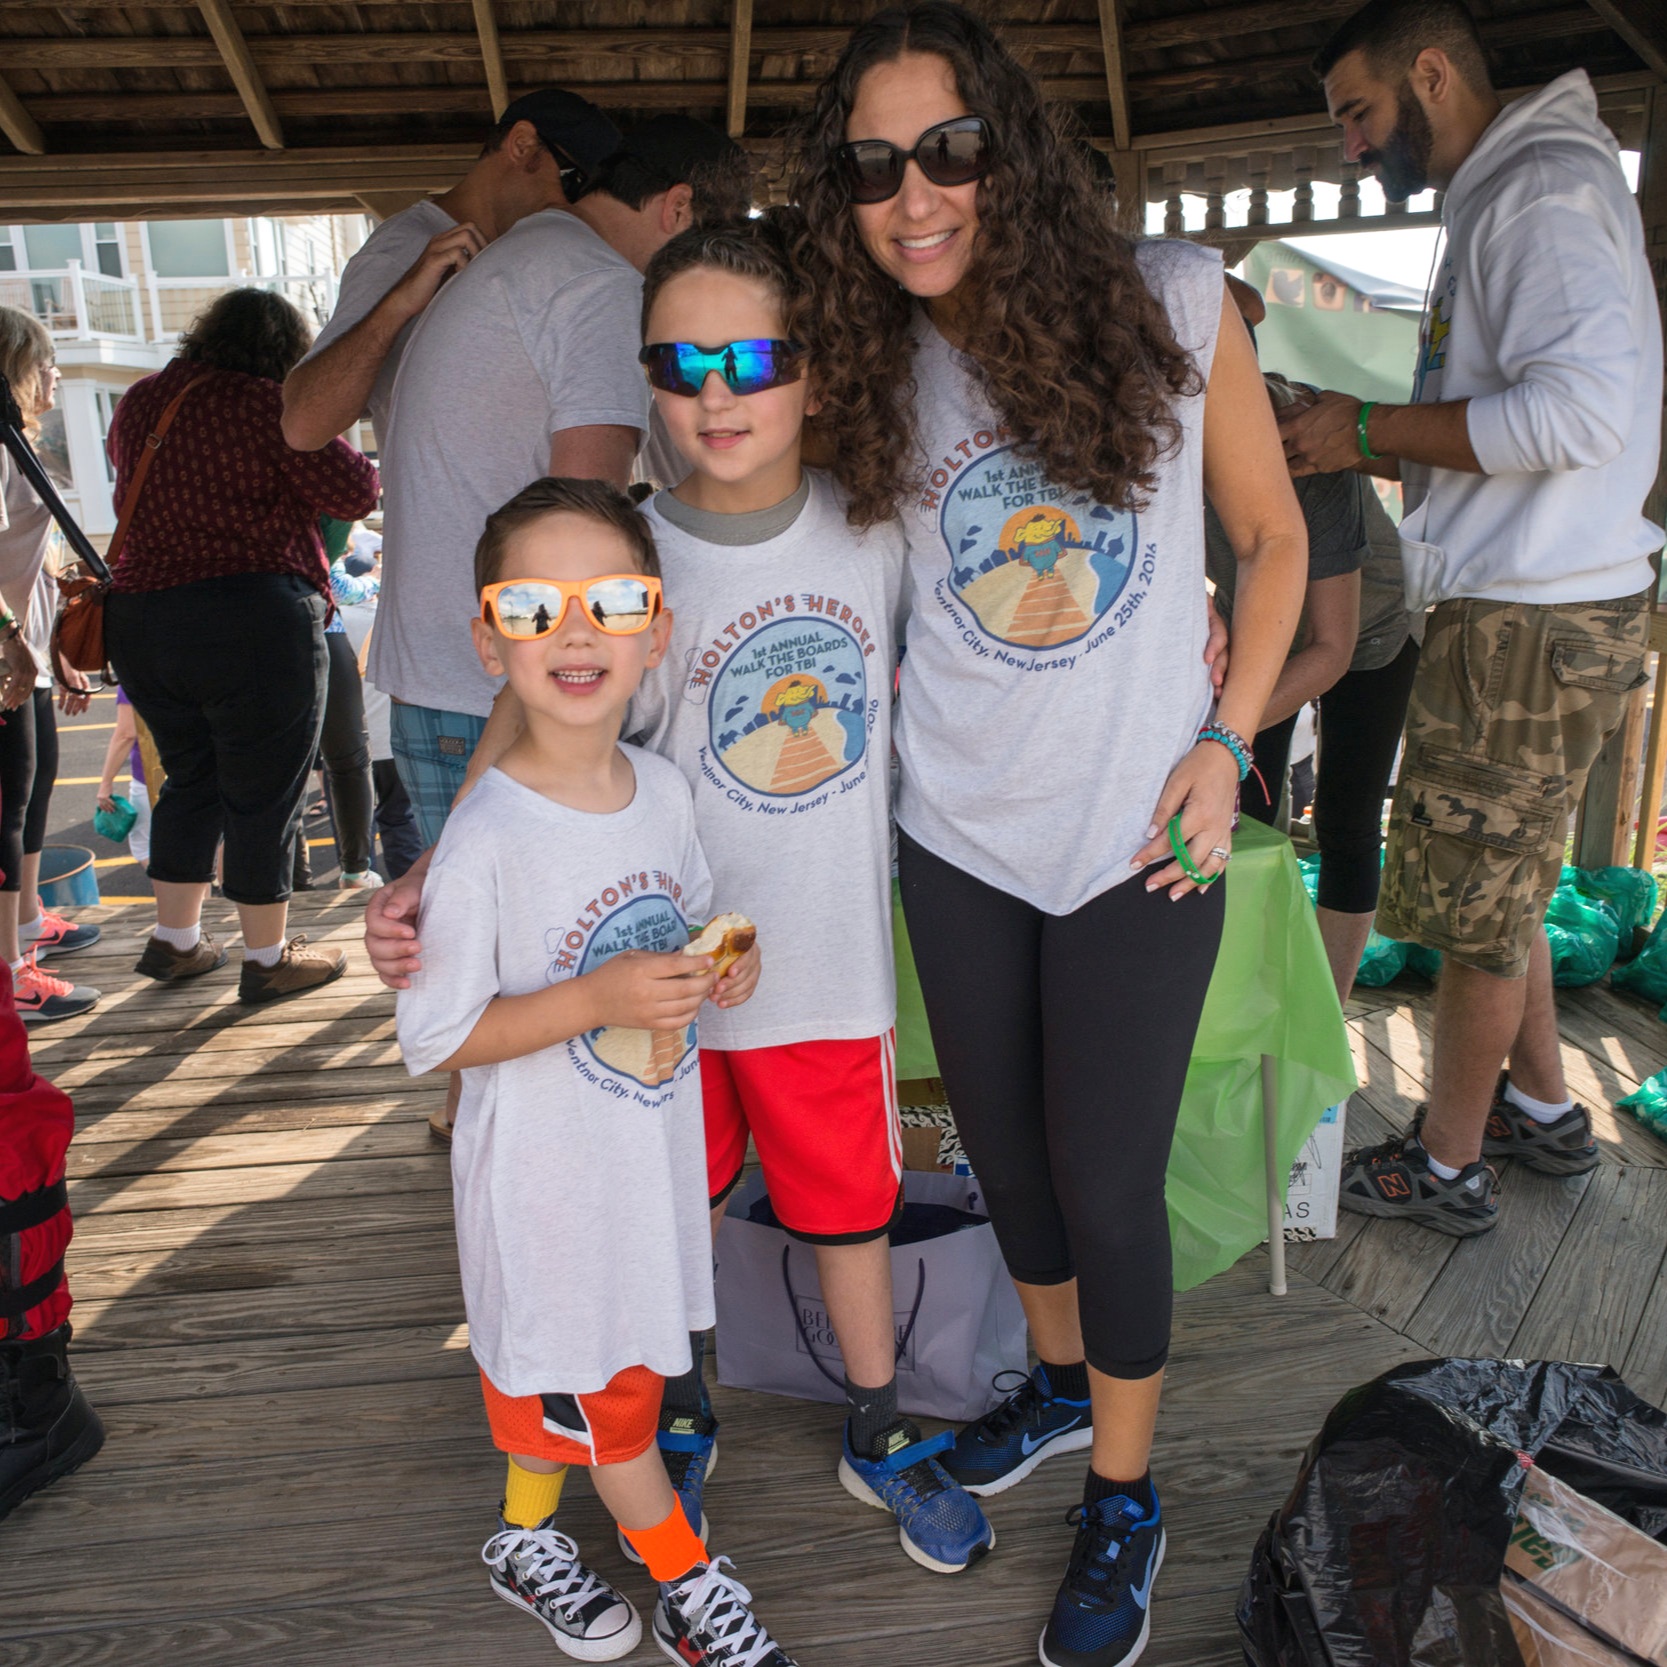  Chase (middle) poses with his mom Wendi and little brother Mason at the 1st annual Holton’s Heroes charity walk in Ventnor City, NJ in 2016. 